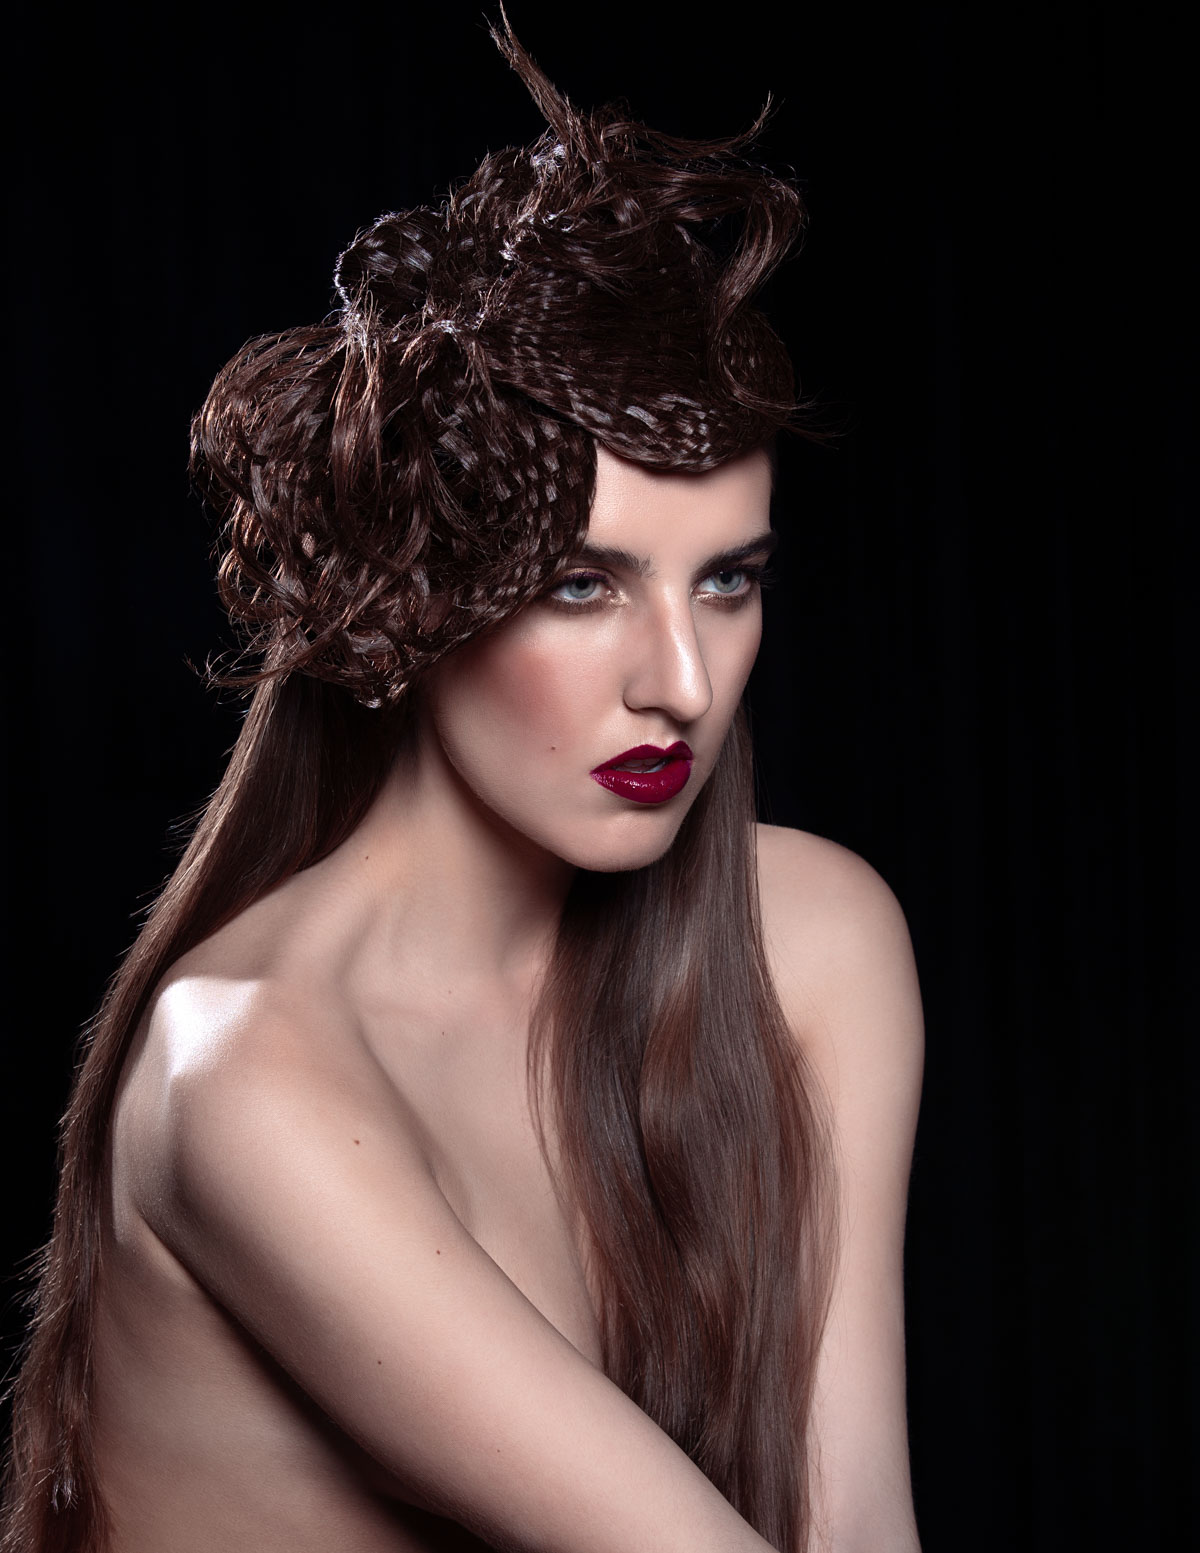 A model with an extravagant hair style and bright red lipstick